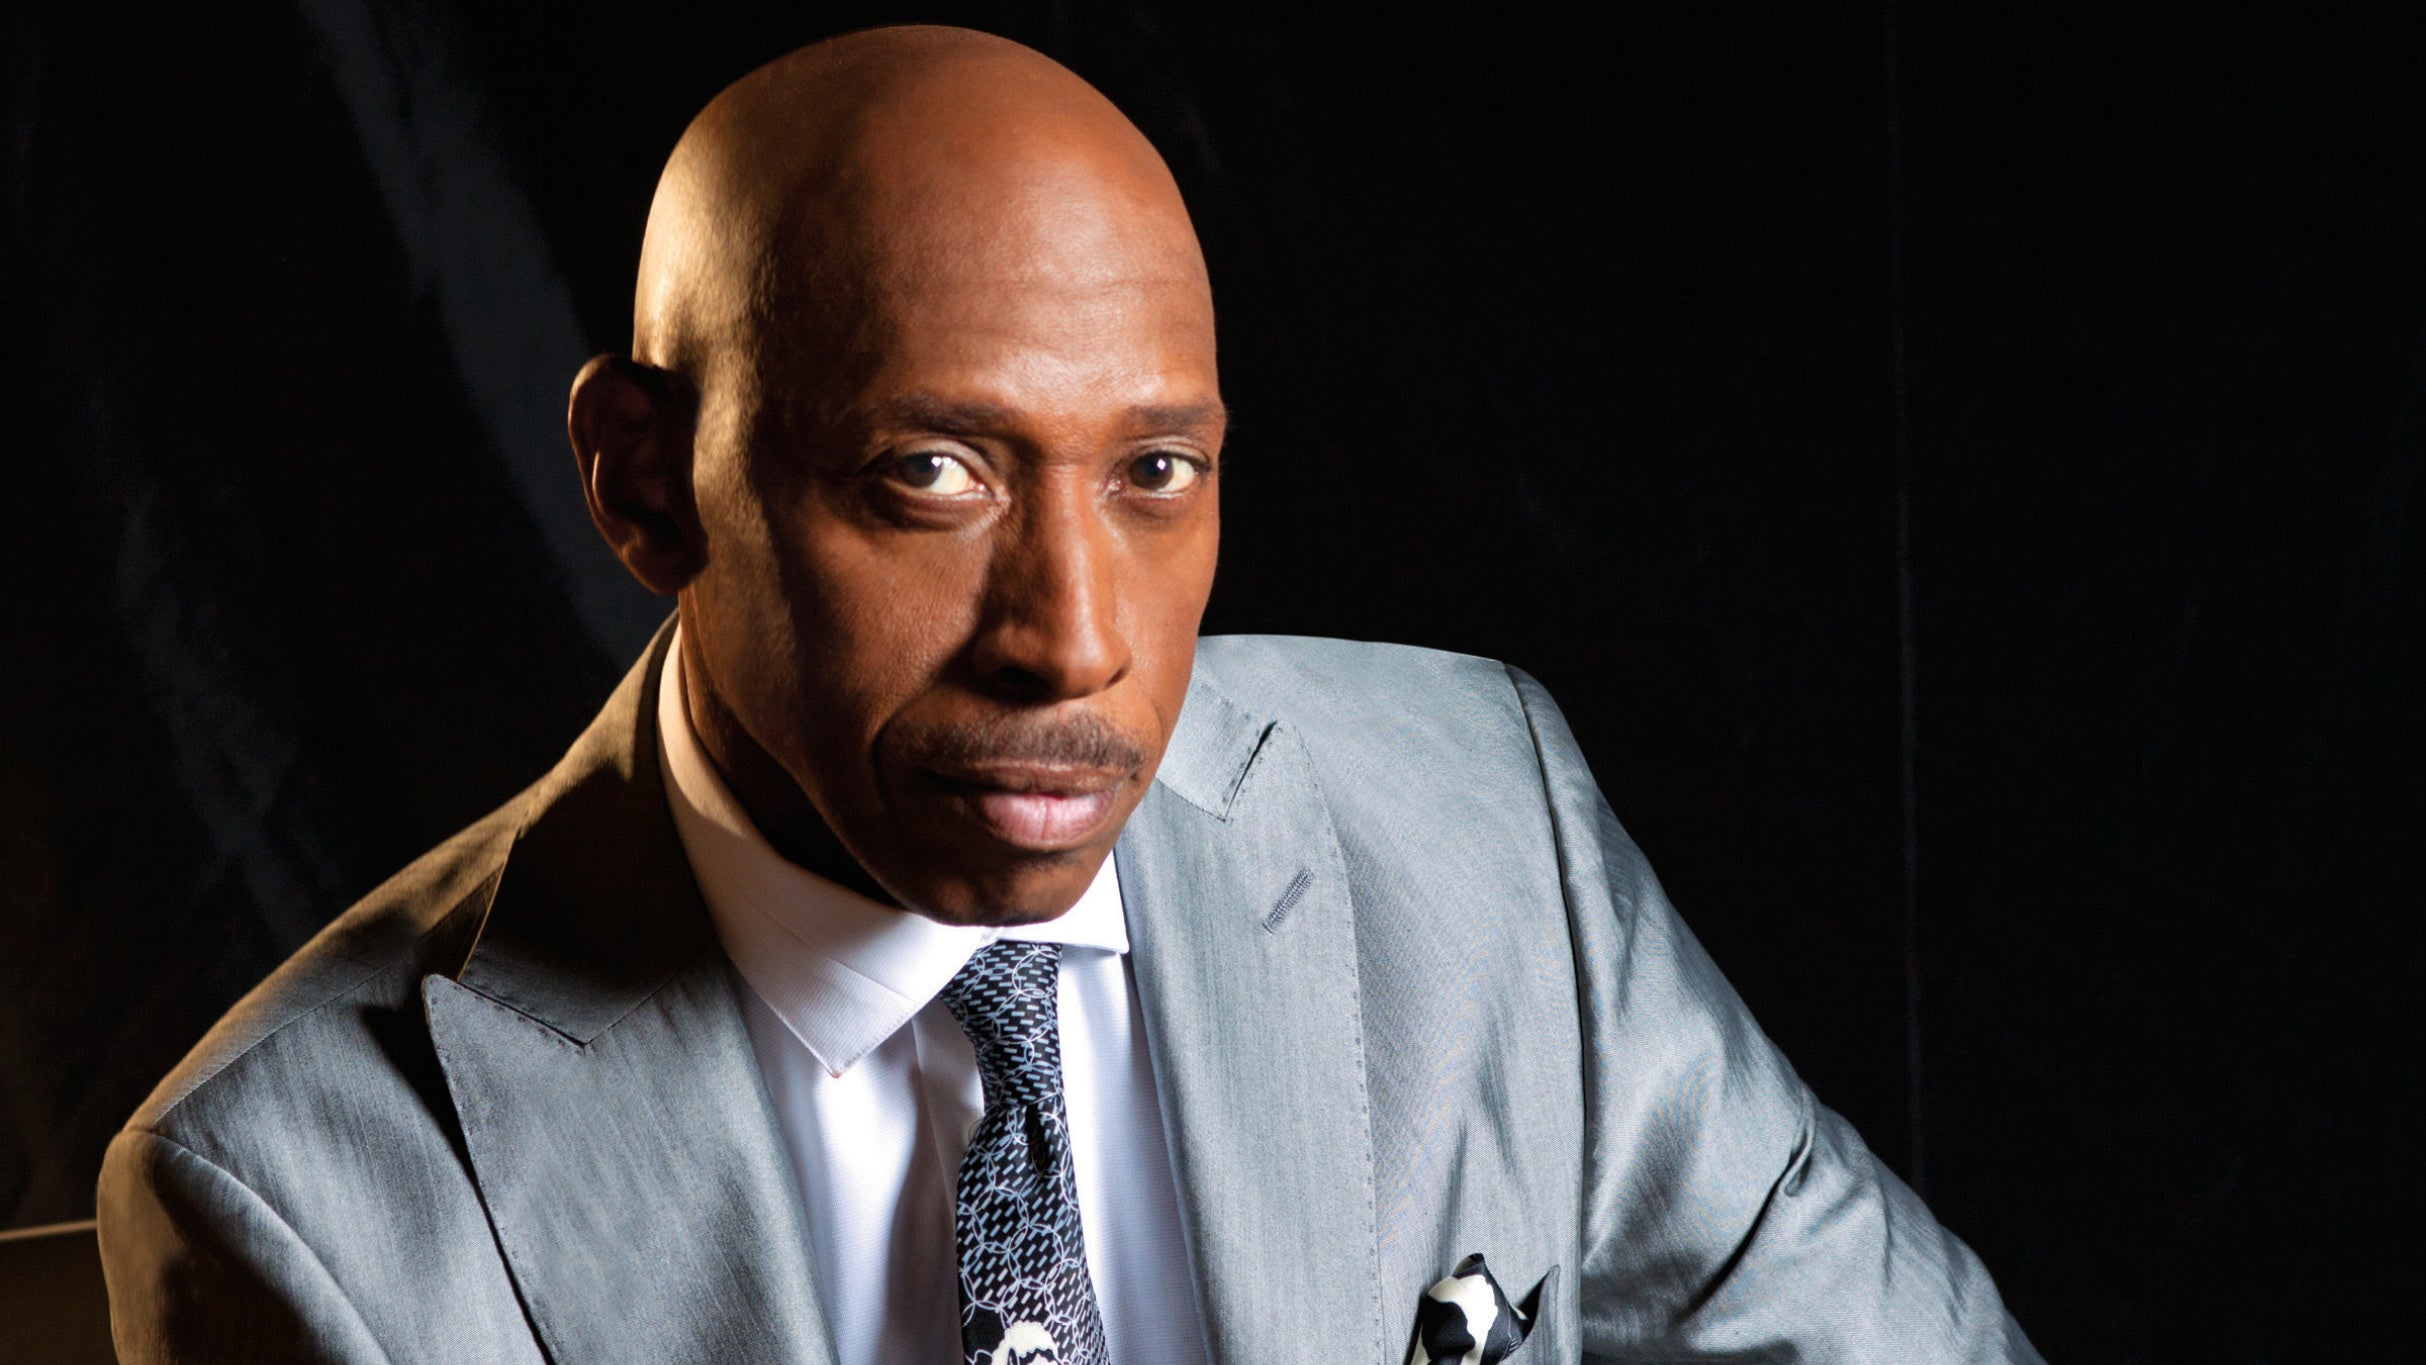 An Evening Of Classic Soul: Jeffrey Osborne And Peabo Bryson free presale pasword for early tickets in Mableton